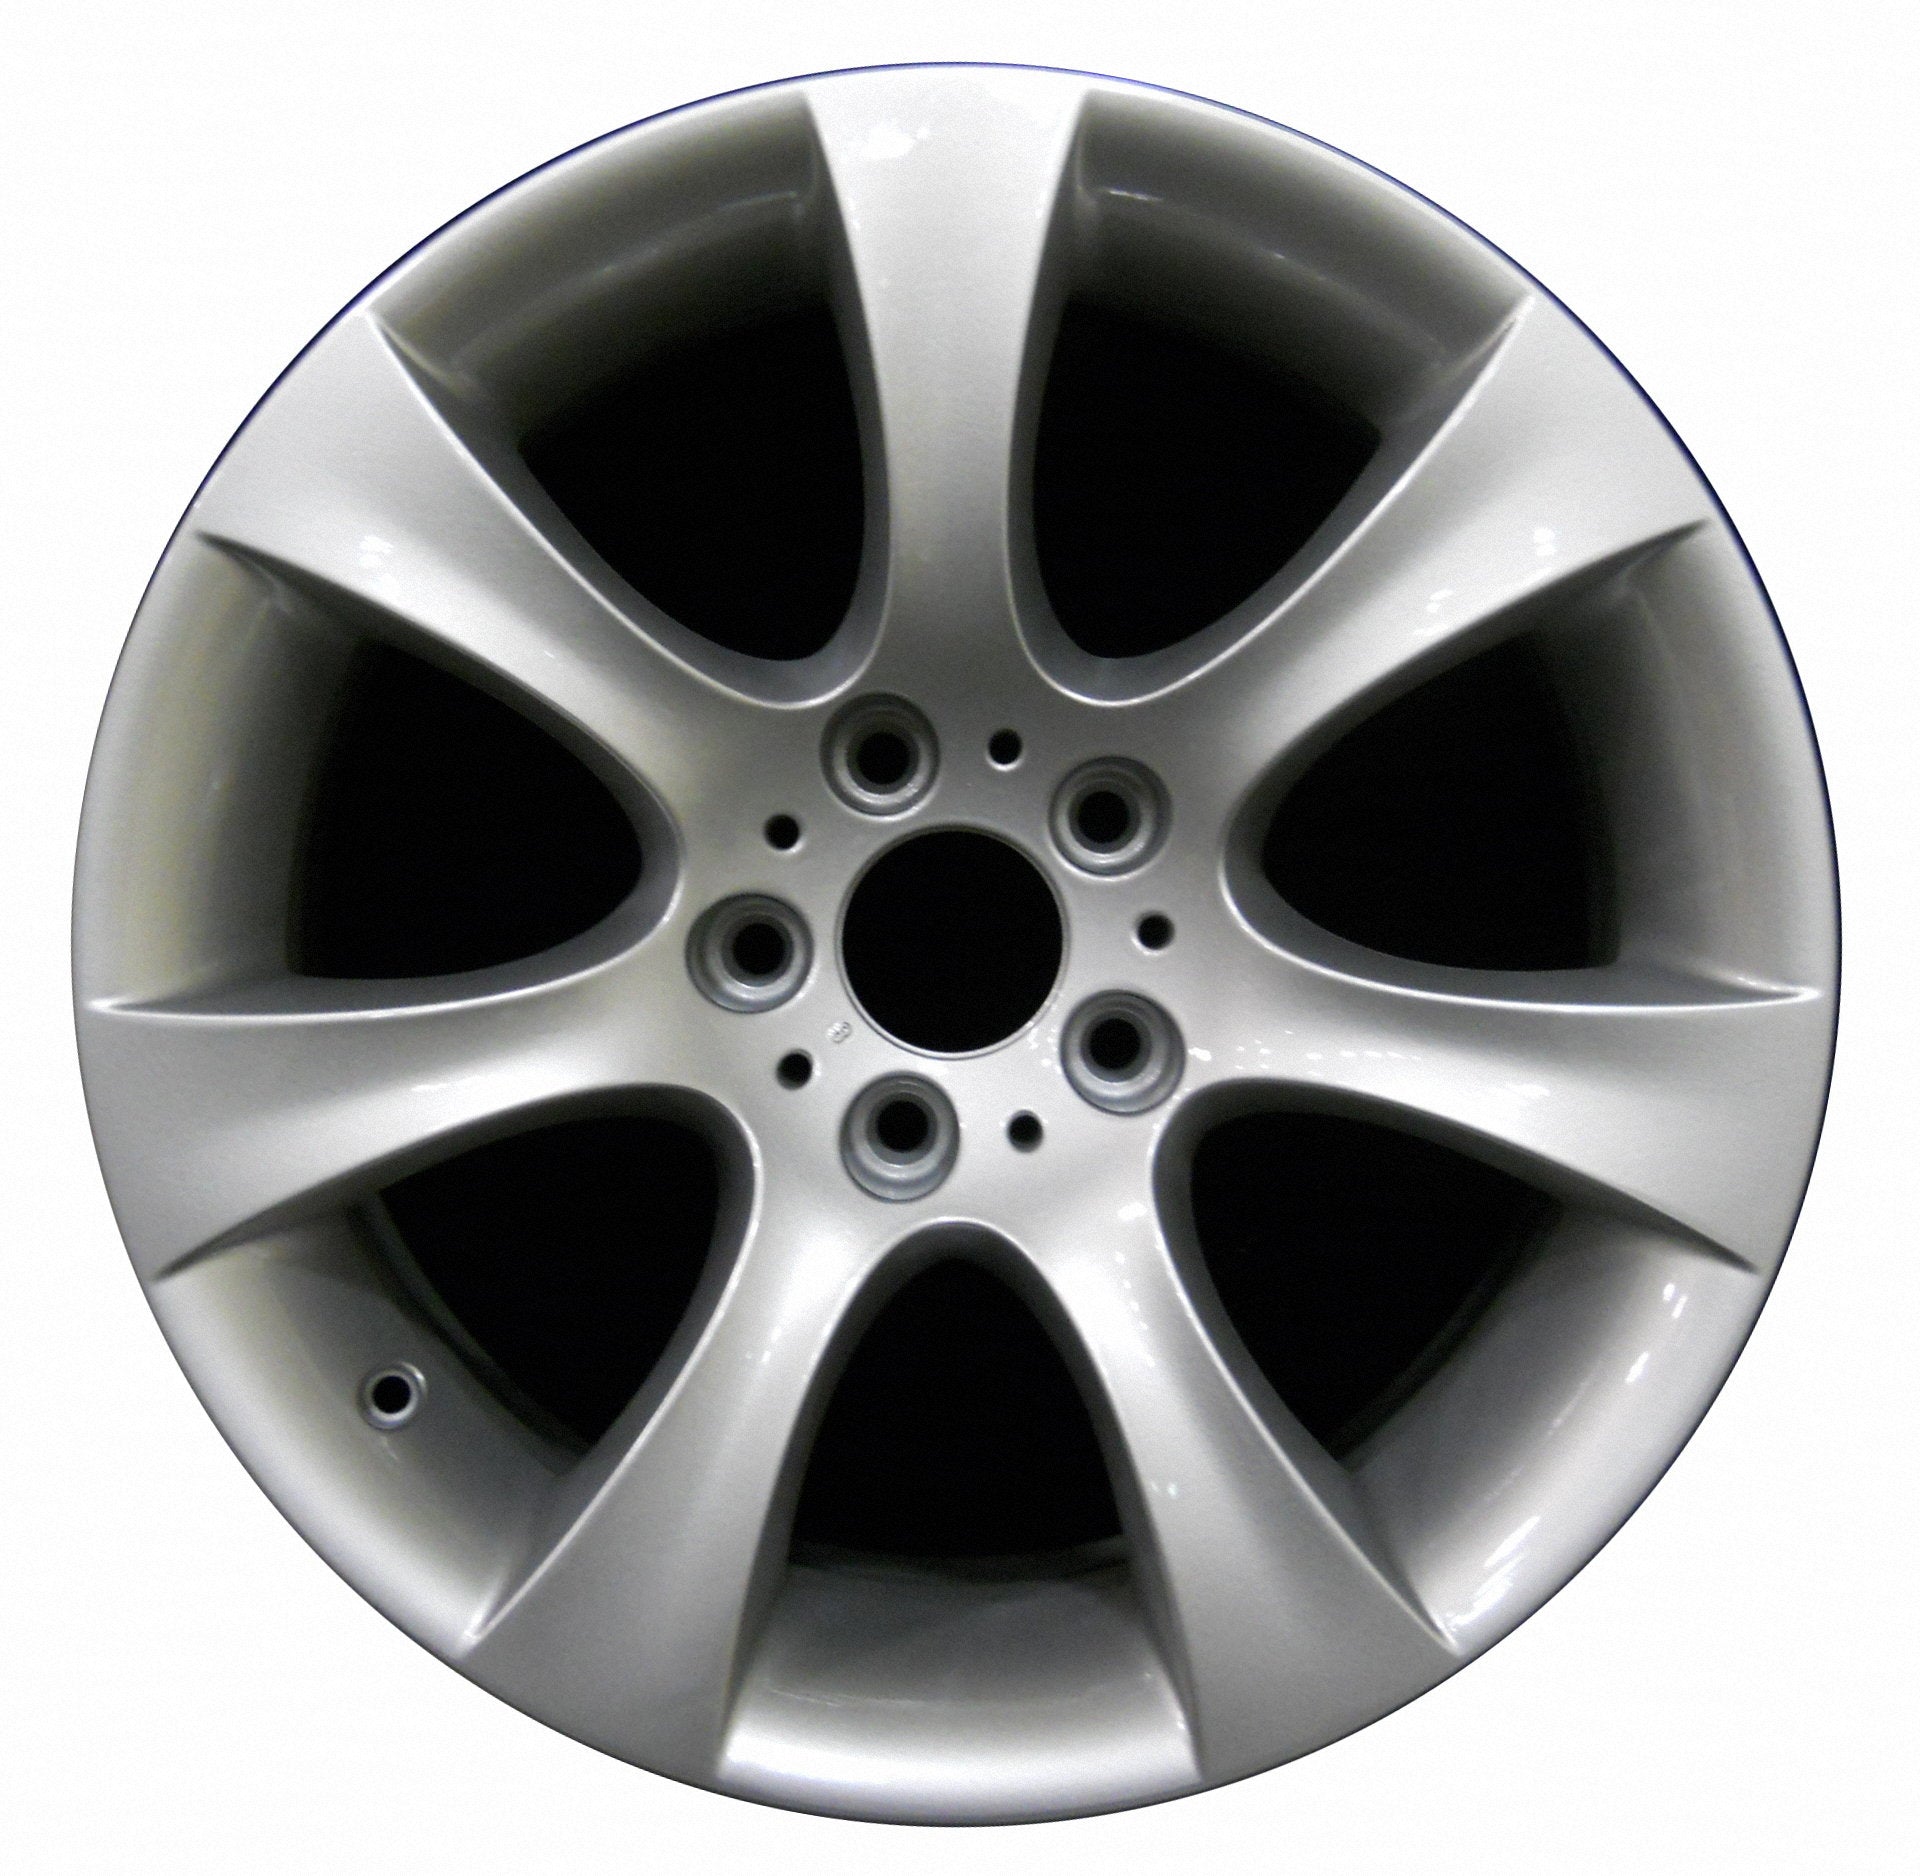 BMW 535i  2008, 2009, 2010 Factory OEM Car Wheel Size 18x9 Alloy WAO.59479RE.PS06.FF